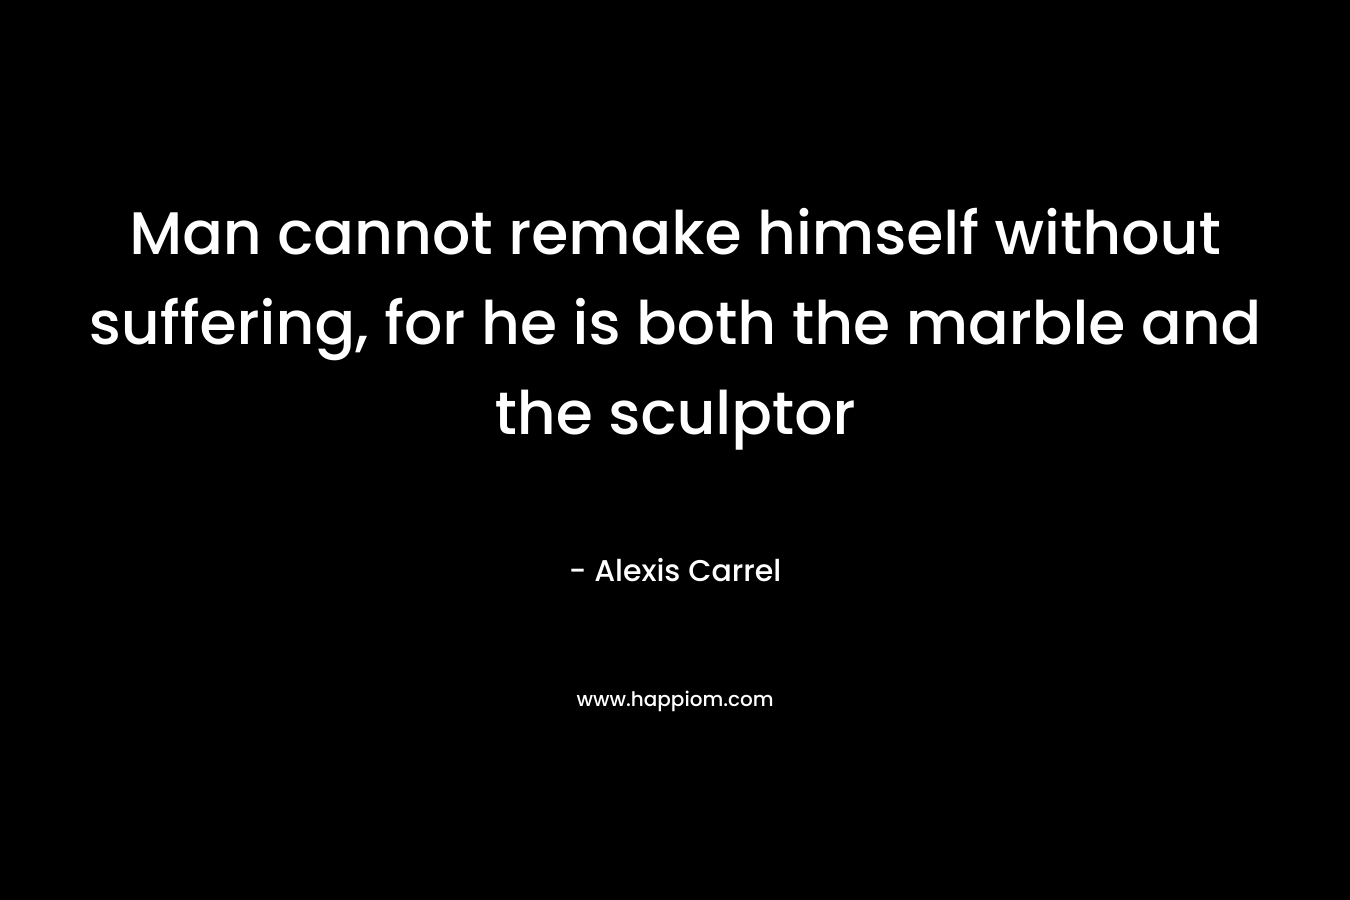 Man cannot remake himself without suffering, for he is both the marble and the sculptor – Alexis Carrel